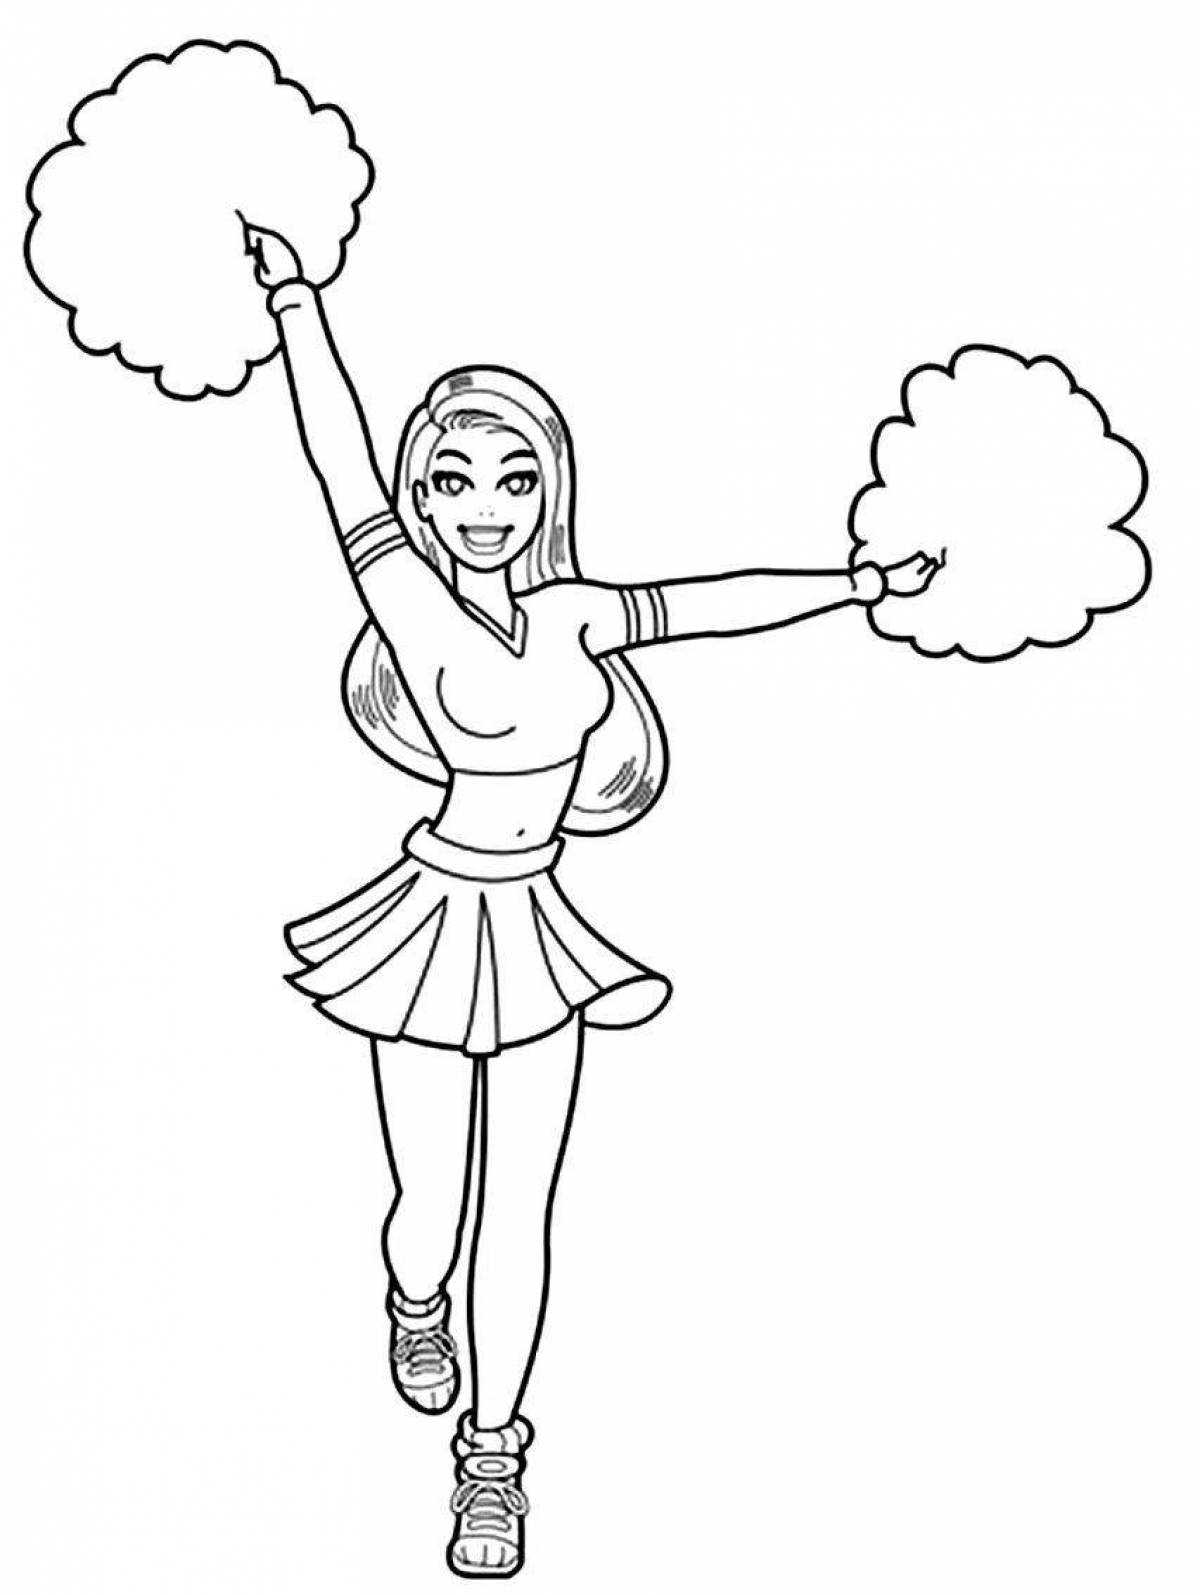 Coloring page cheerful dancing girl